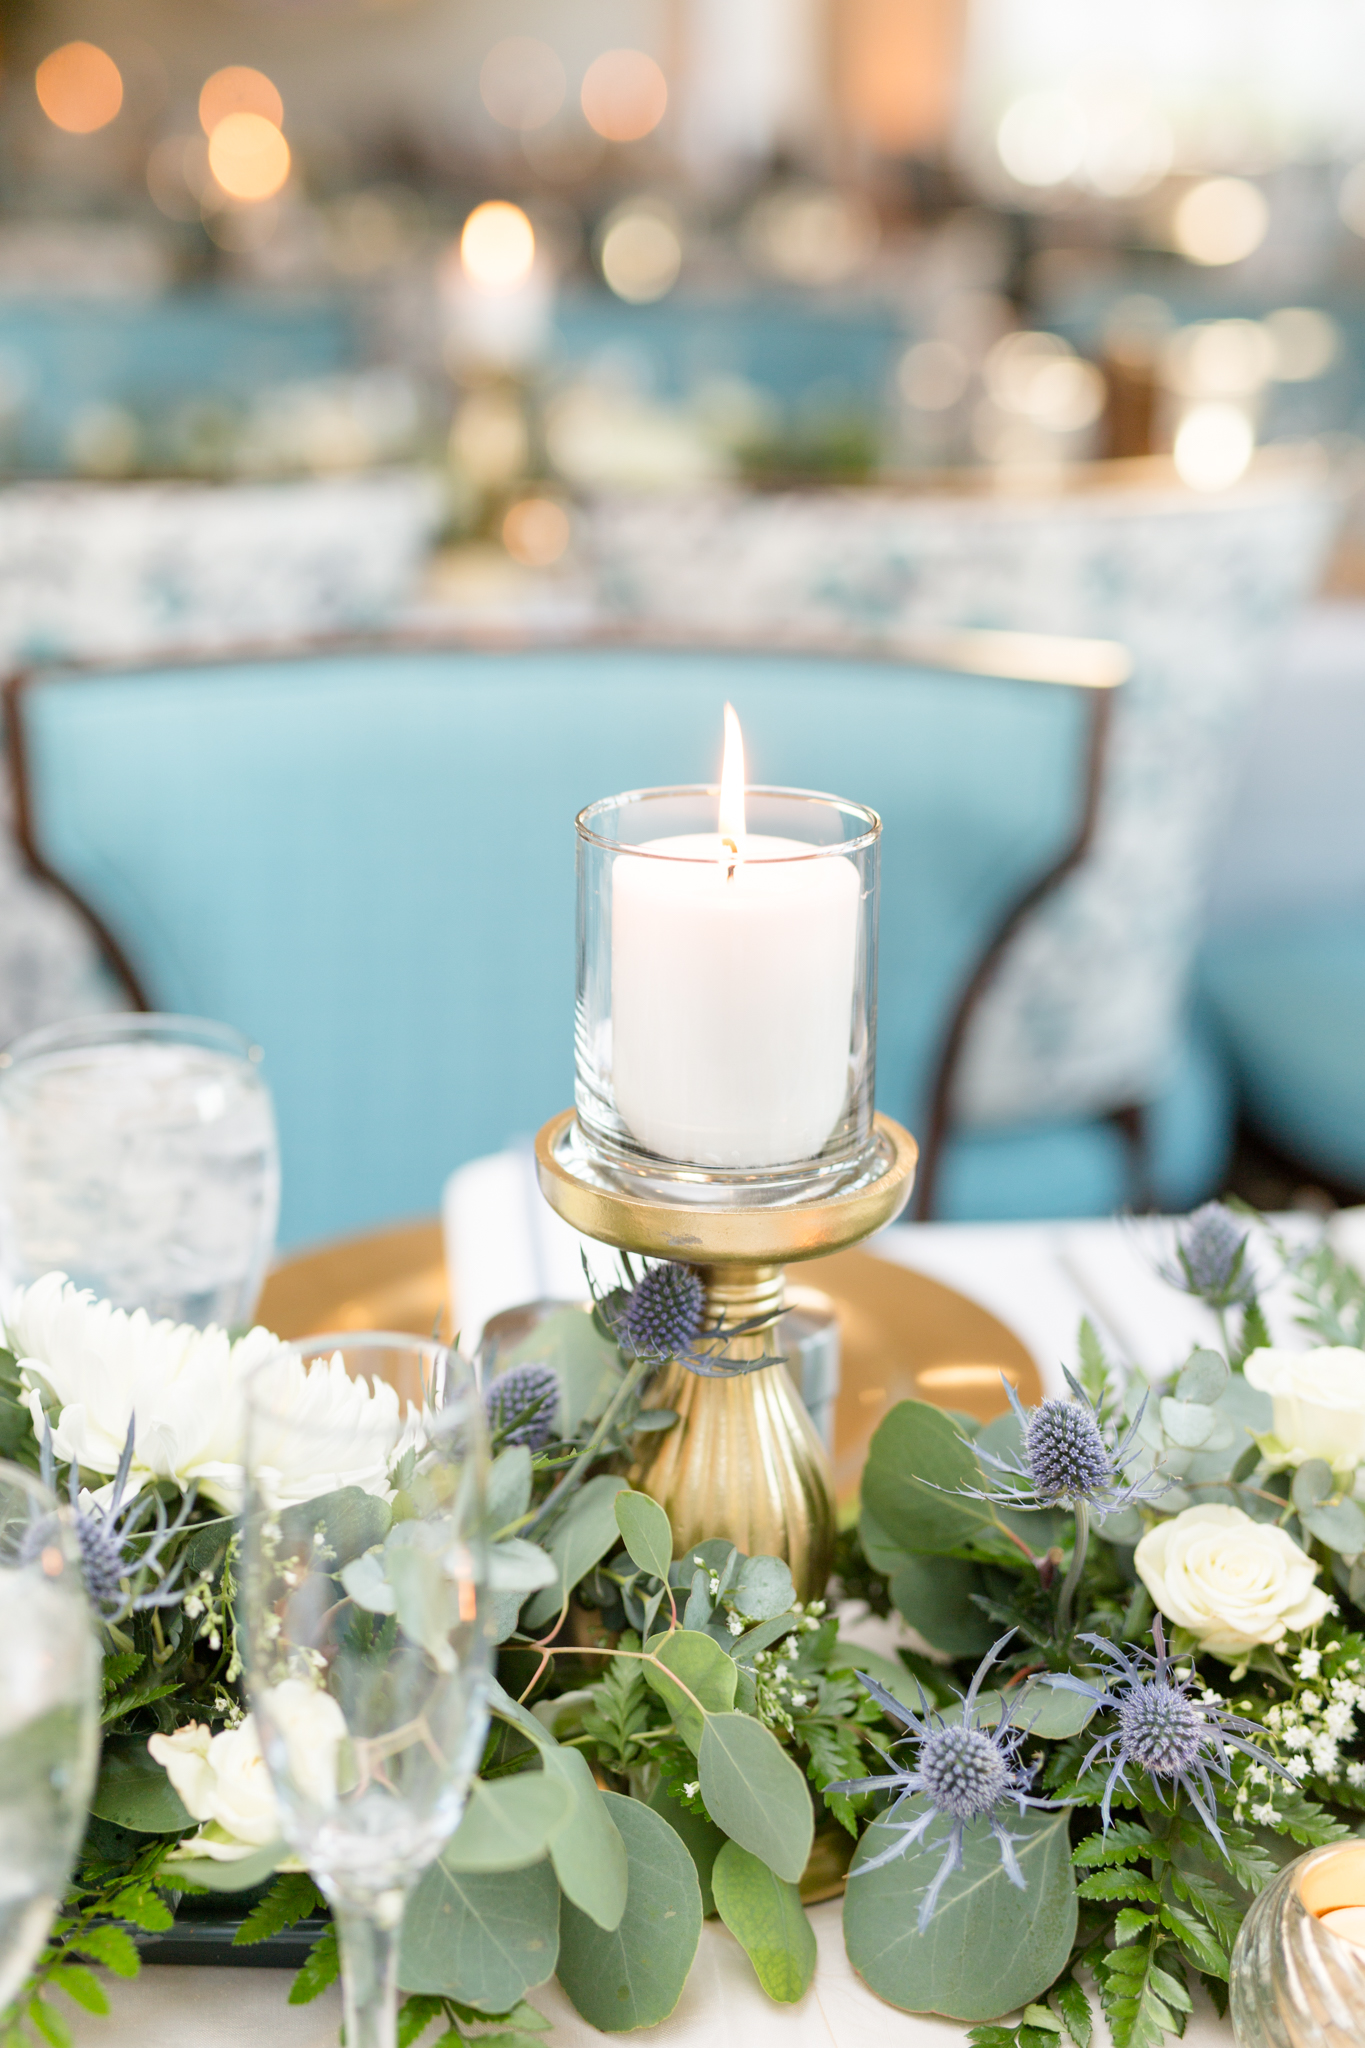 Candle burns on wedding reception table.